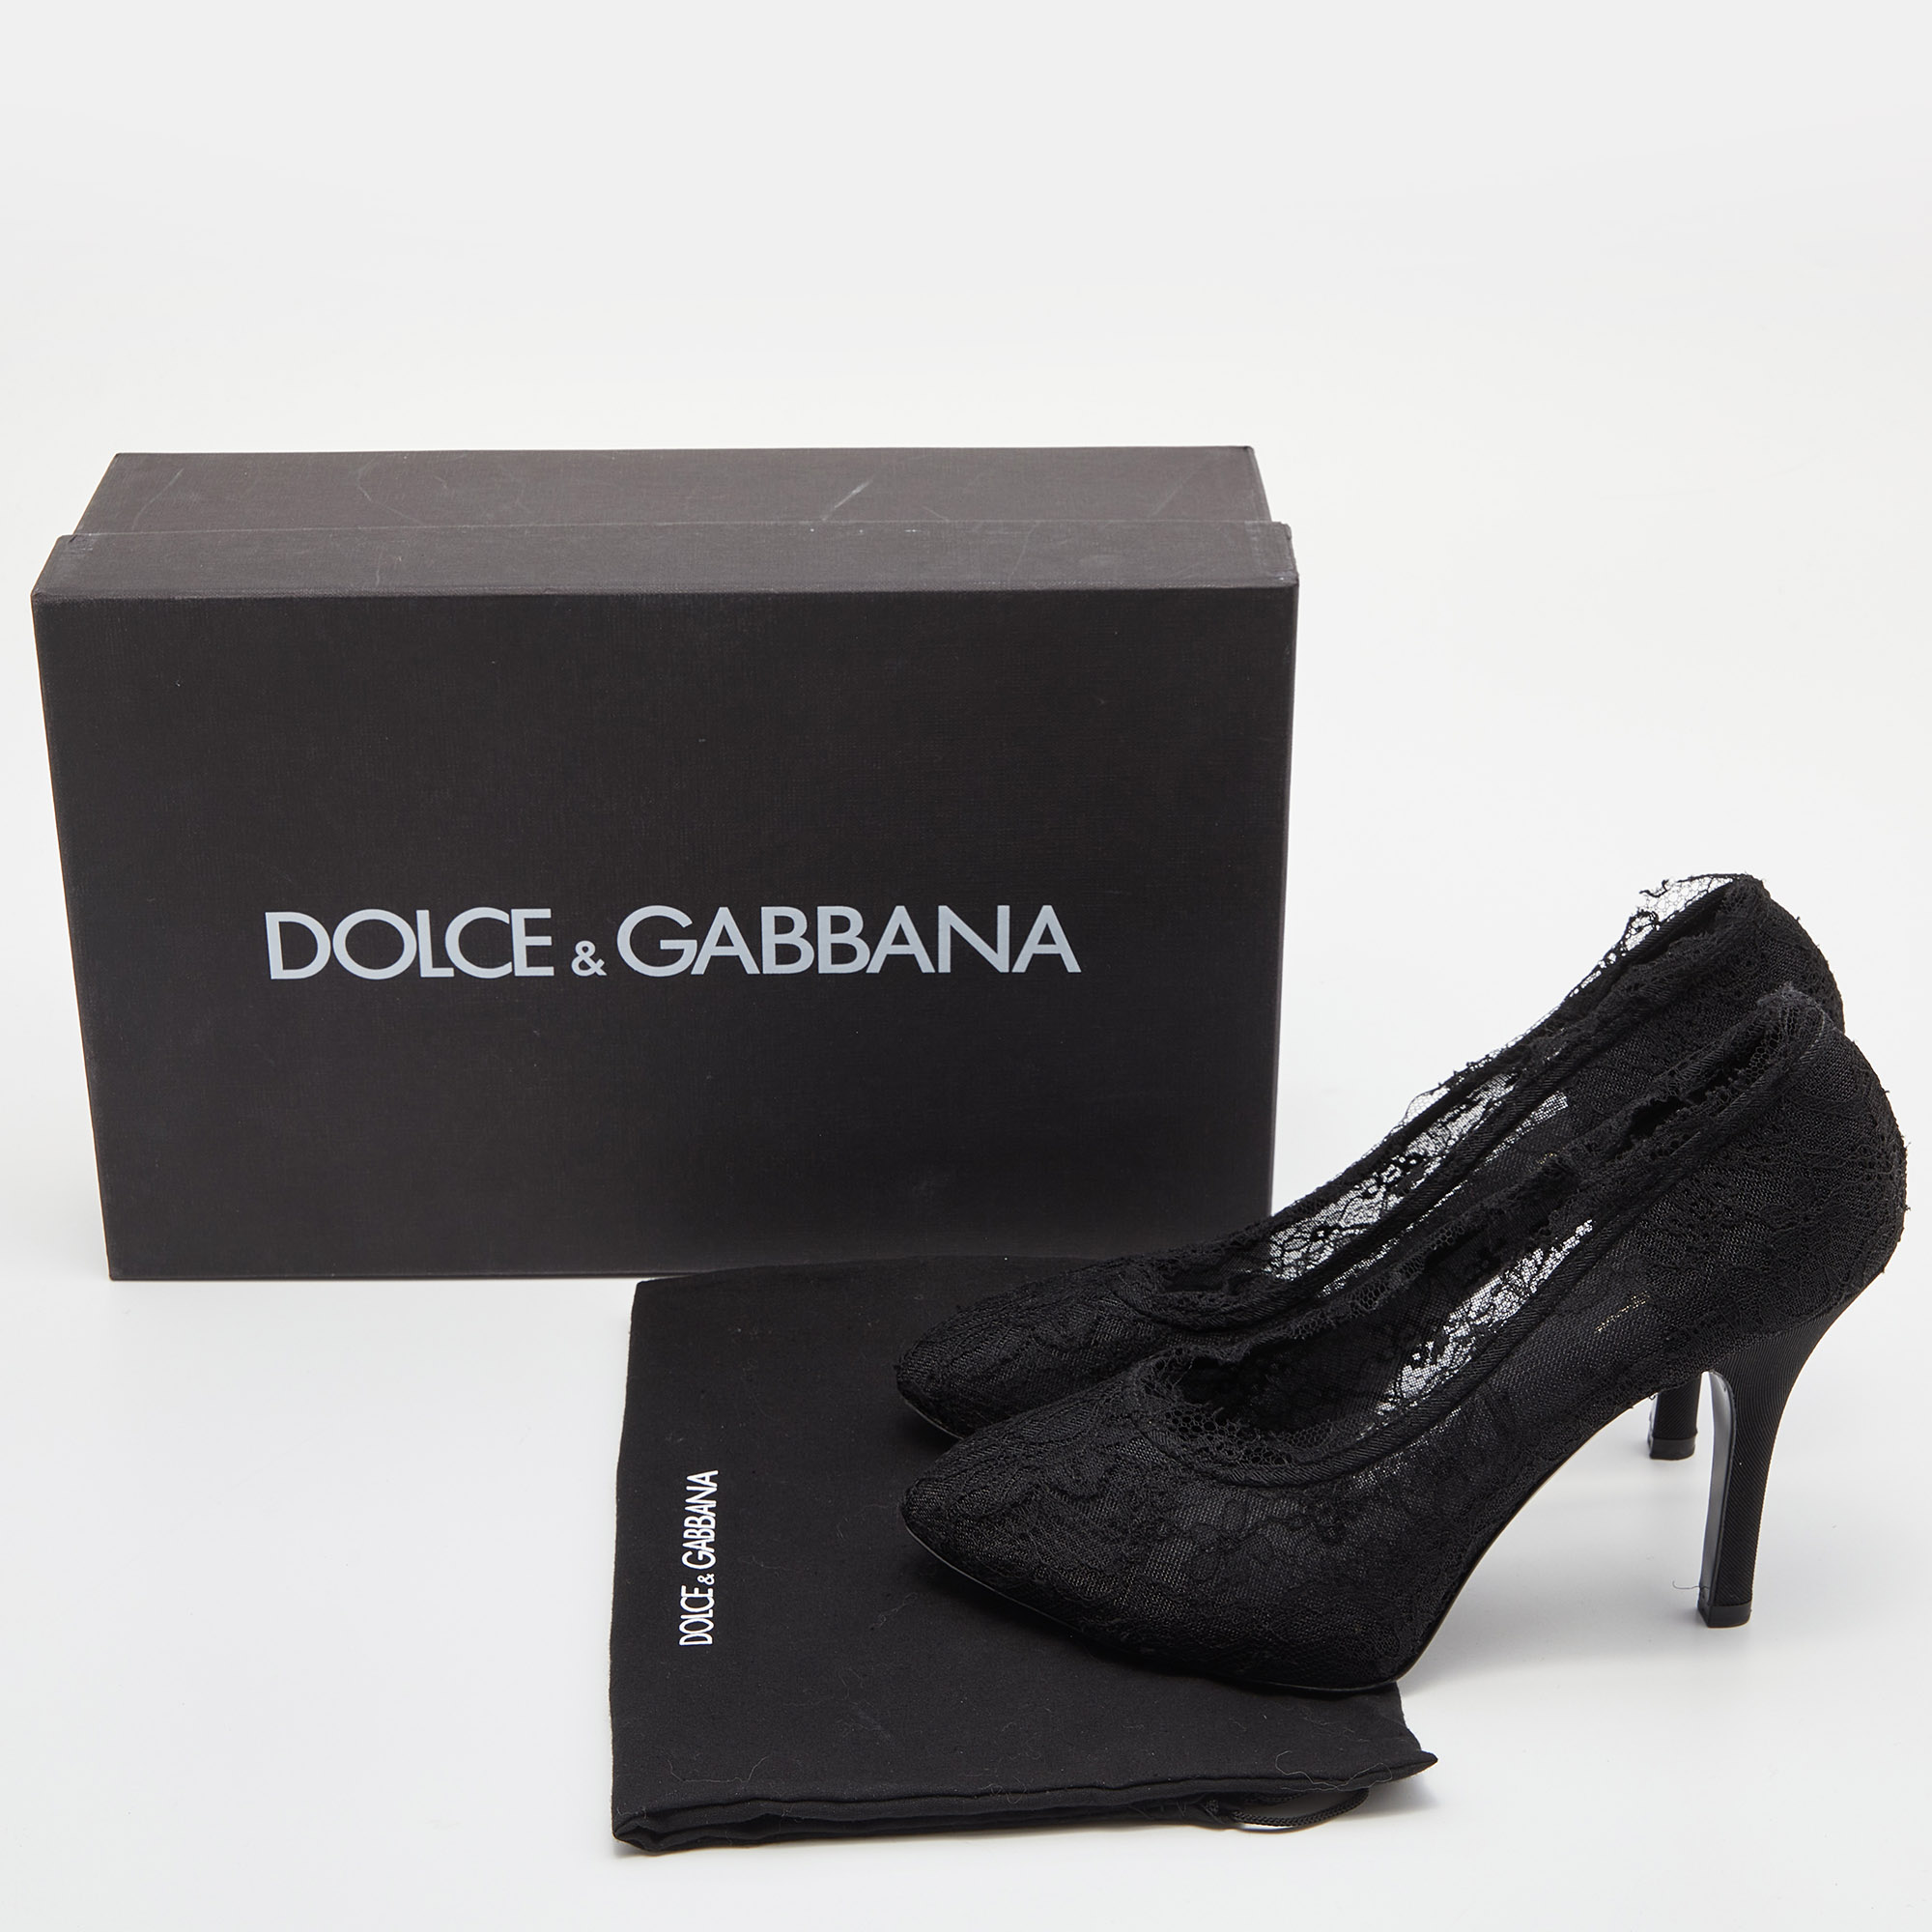 Dolce & Gabbana Black Lace And Fabric Pumps Size 39